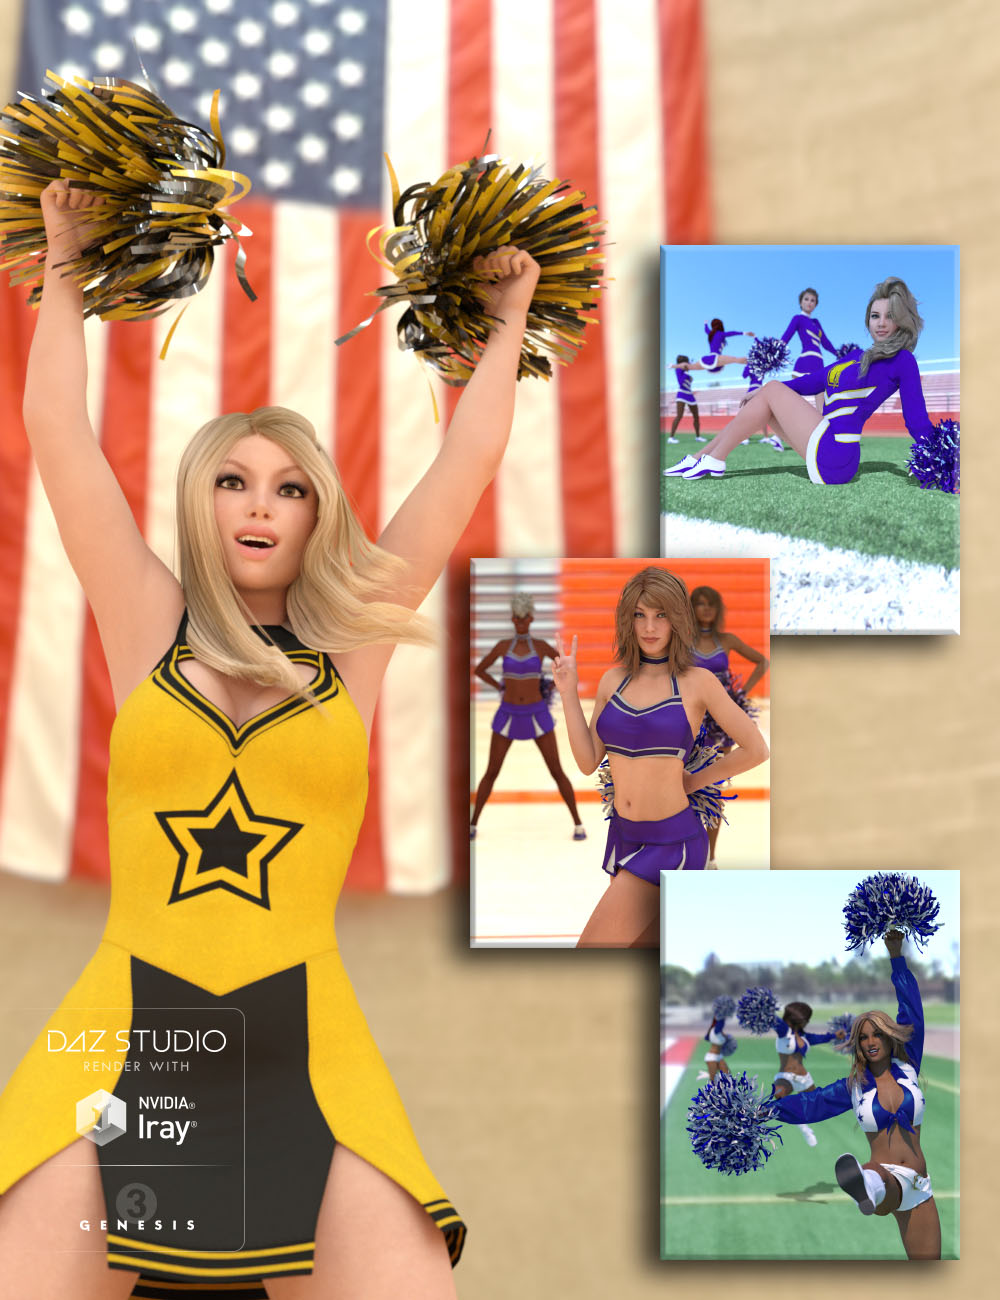 6,757 Cheerleader Pose Royalty-Free Photos and Stock Images | Shutterstock